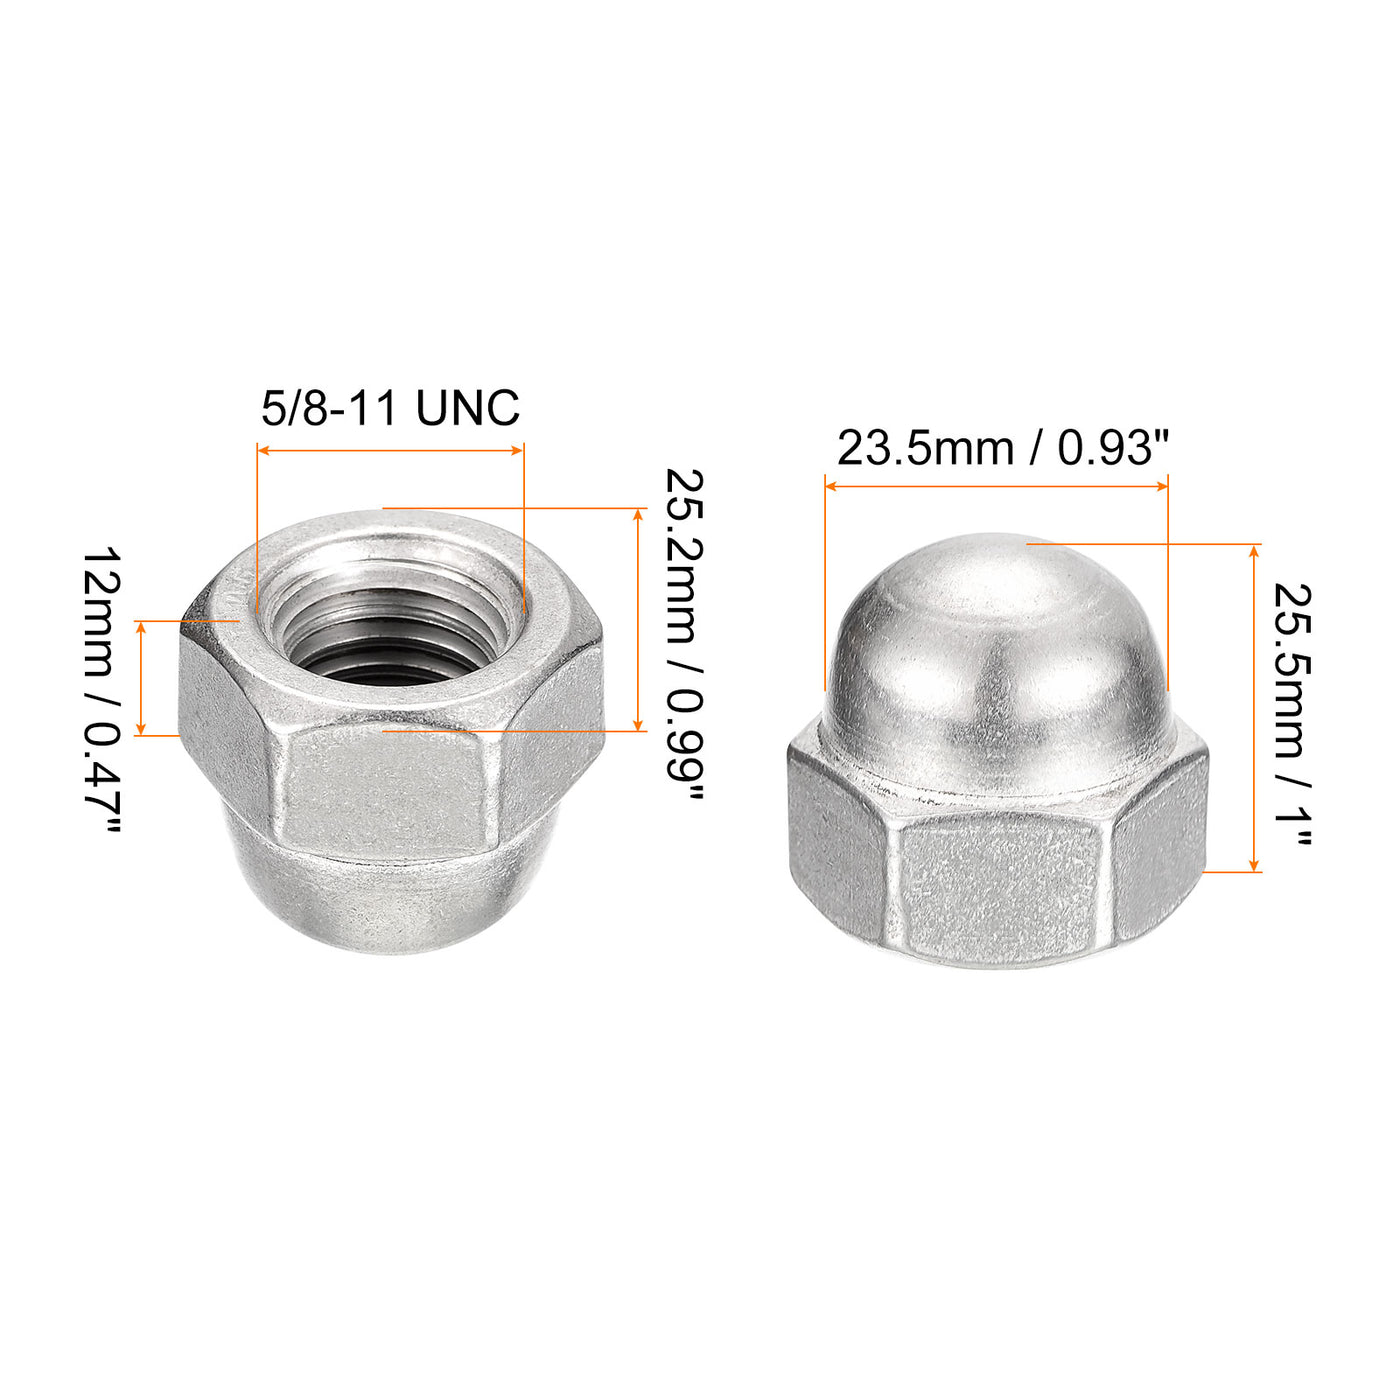 uxcell Uxcell 5/8-11 Acorn Cap Nuts,3pcs - 304 Stainless Steel Hardware Nuts, Acorn Hex Cap Dome Head Nuts for Fasteners (Silver)